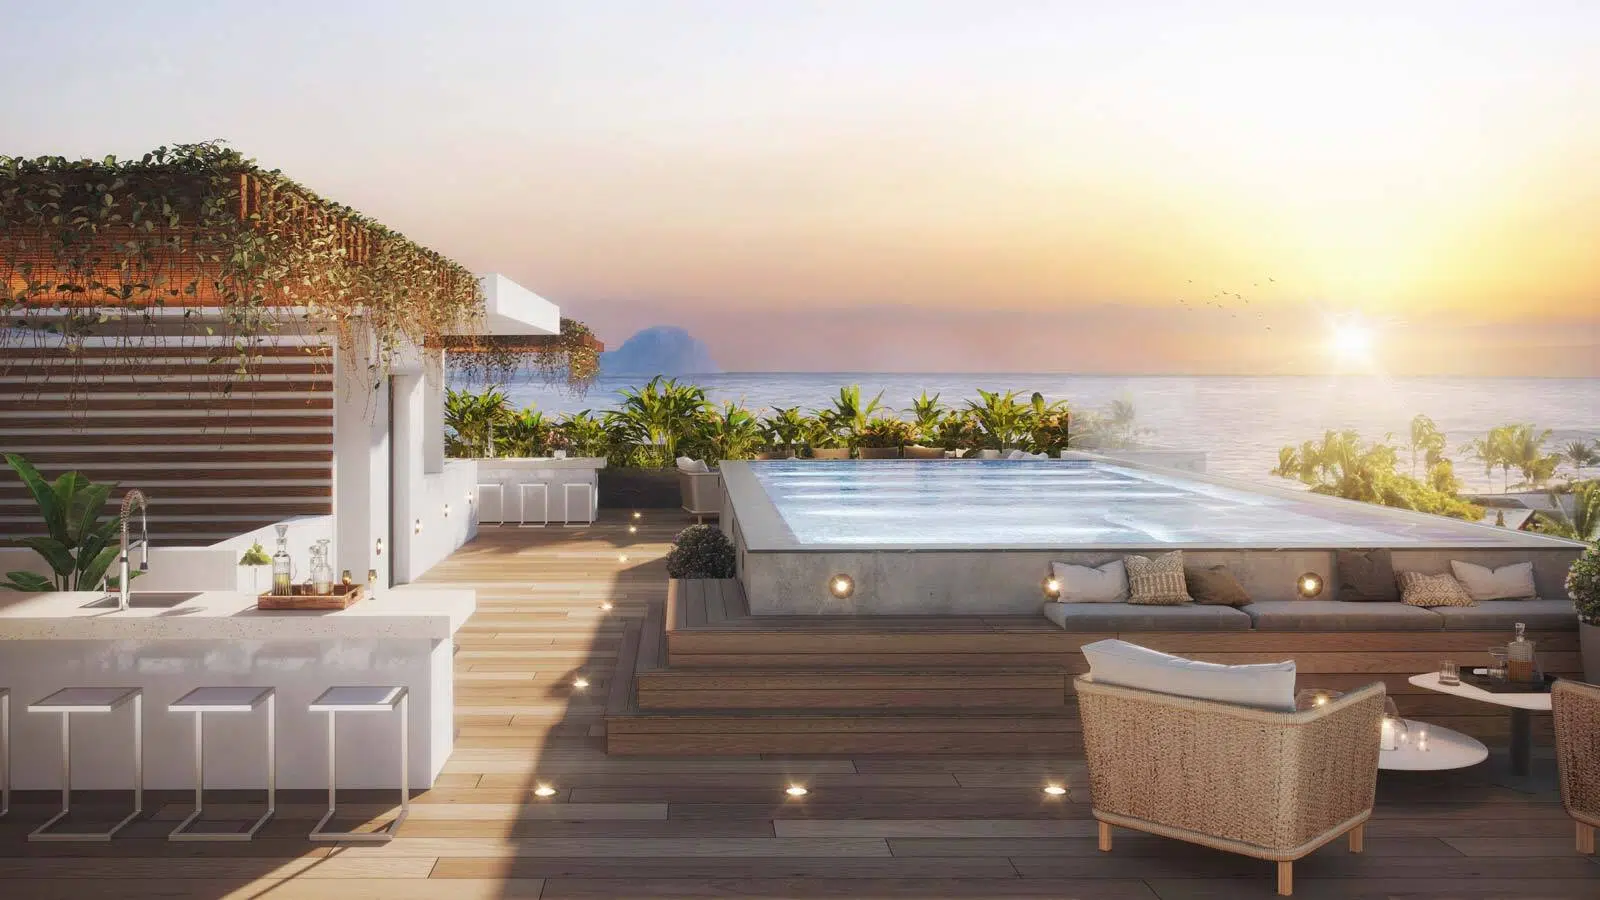 Sunset Cove by 2Futures Rooftop Sky Bar with infinity pool and BBQ area